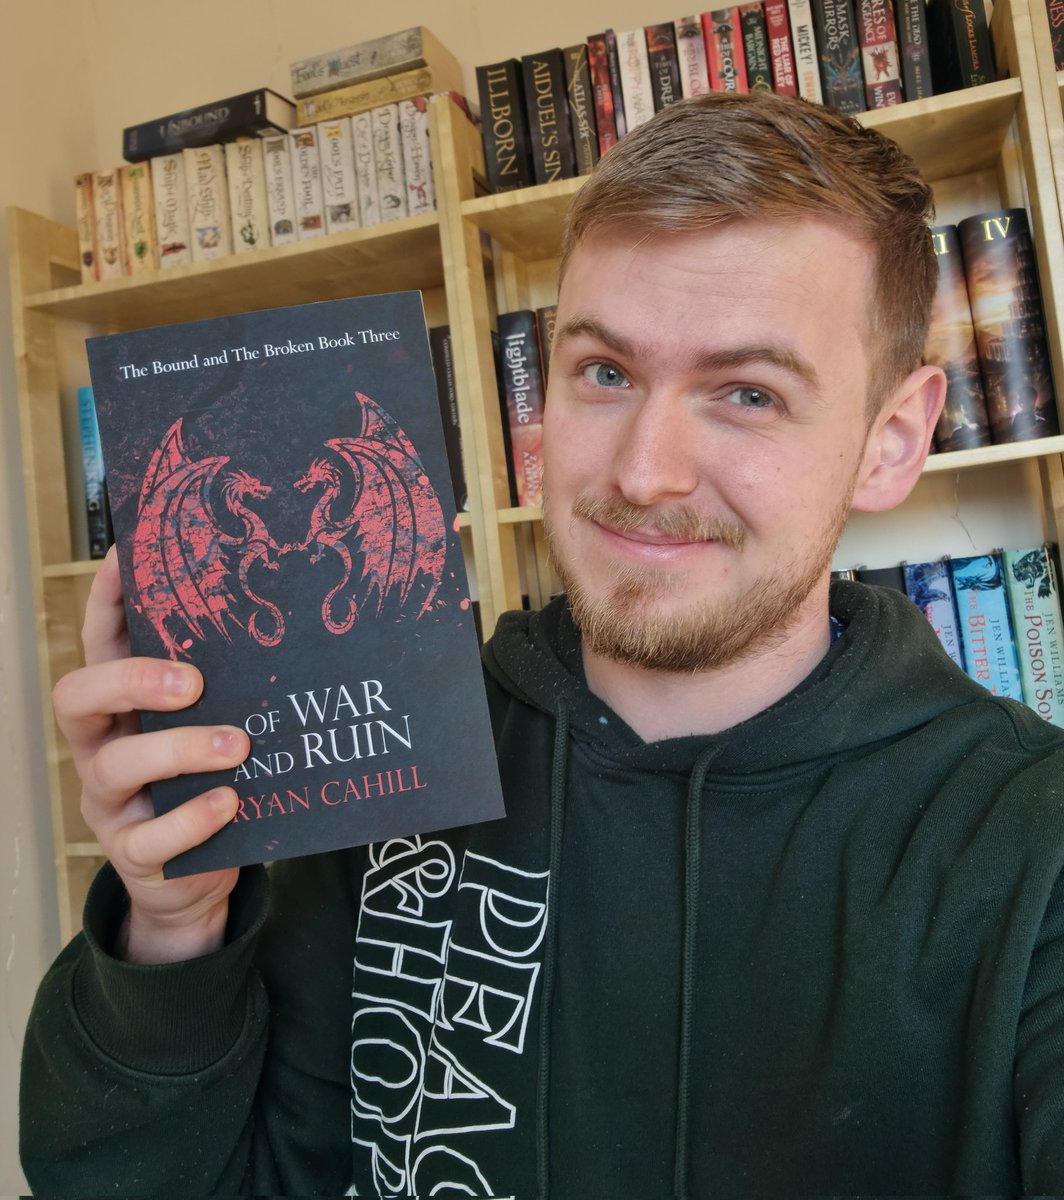 GIVEAWAY 👀 There are only two physical copies of Of War and Ruin by @RCahillAuthor in the world (as of now) and I have both of them. However, I don't need two copies so I am giving away one of the proof copies! Just retweet and follow to enter! UK only due to shipping costs!